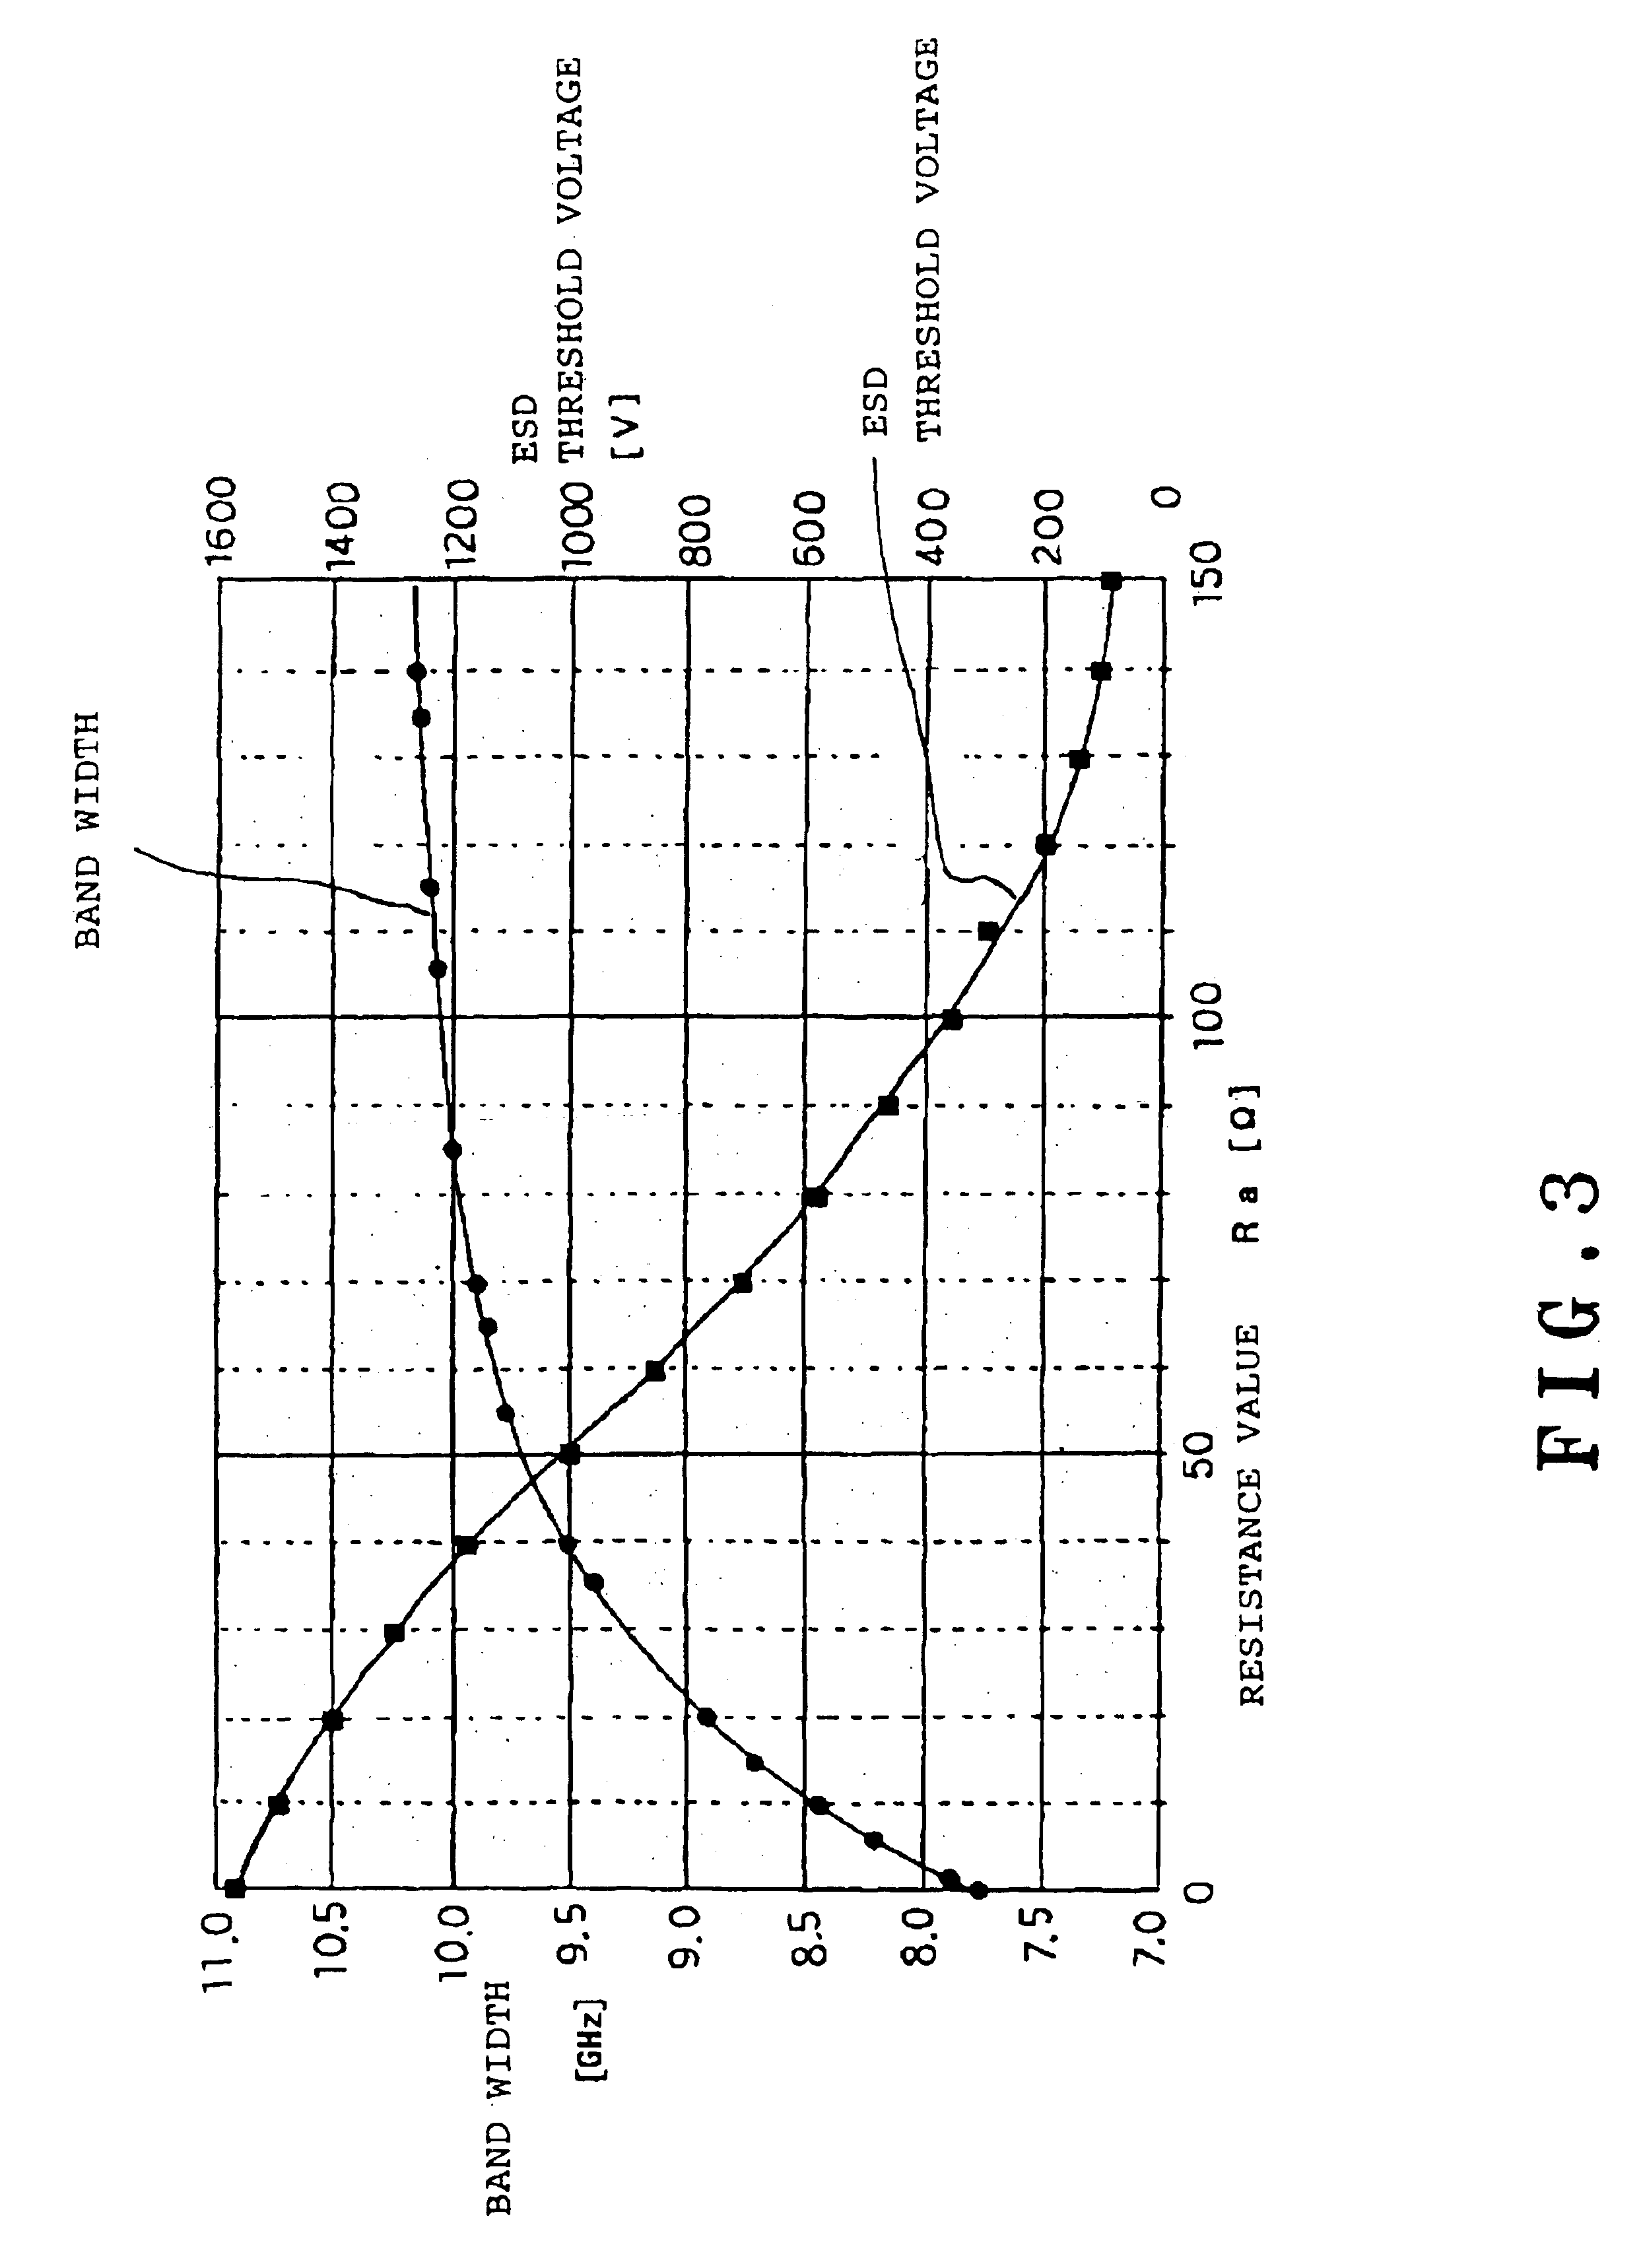 Negative feedback amplifier with electrostatic discharge protection circuit